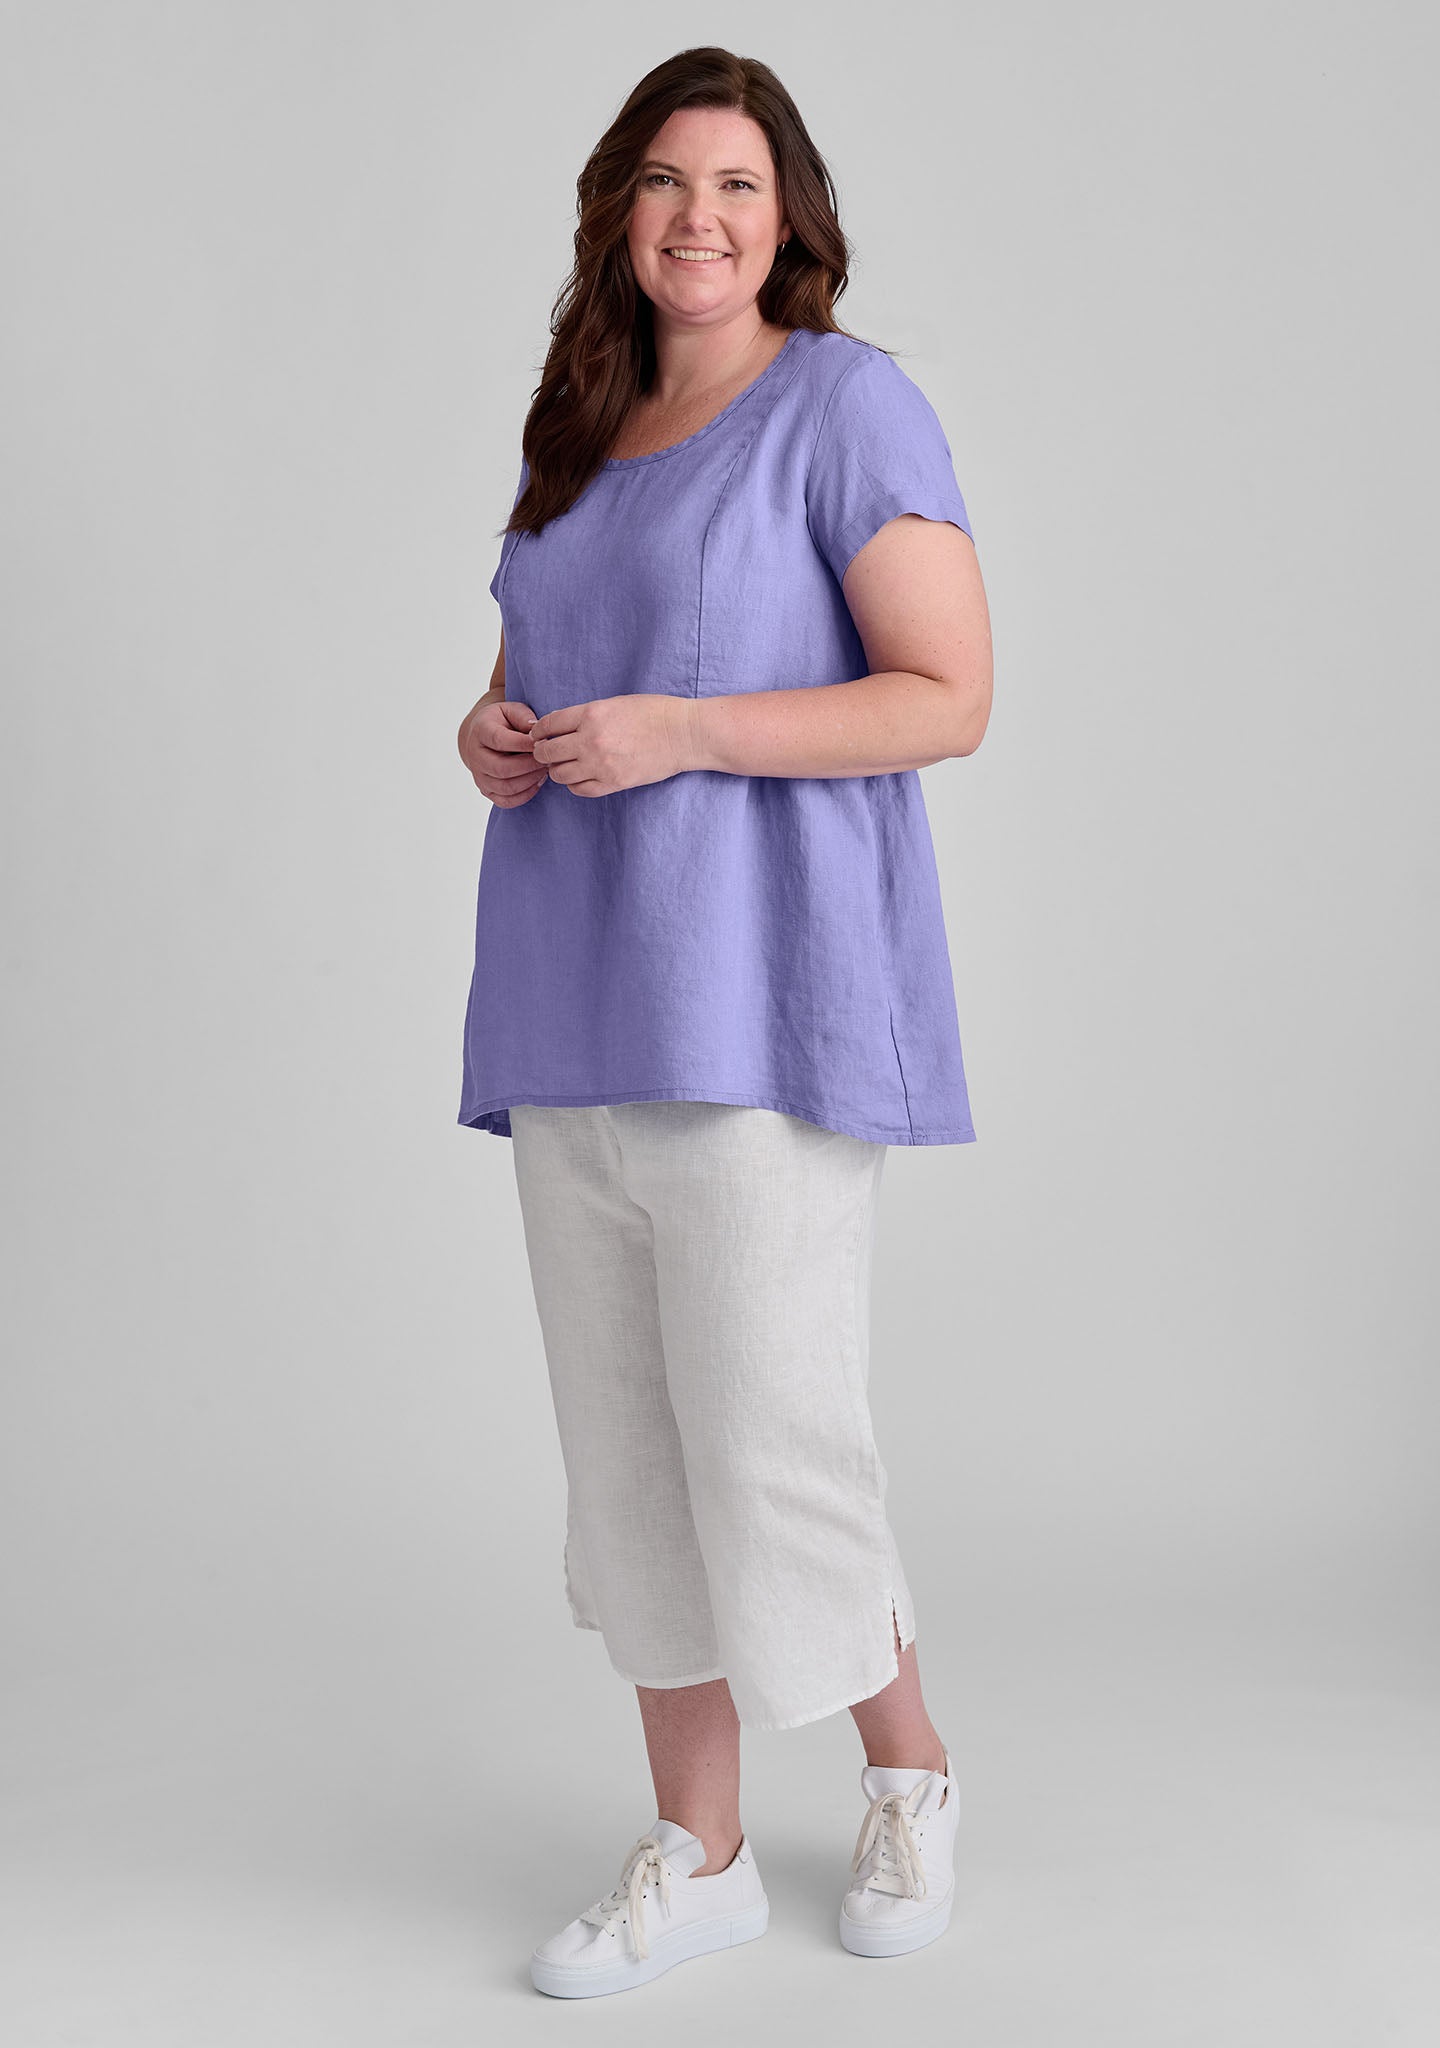 FLAX linen shirt in purple with linen pants in white